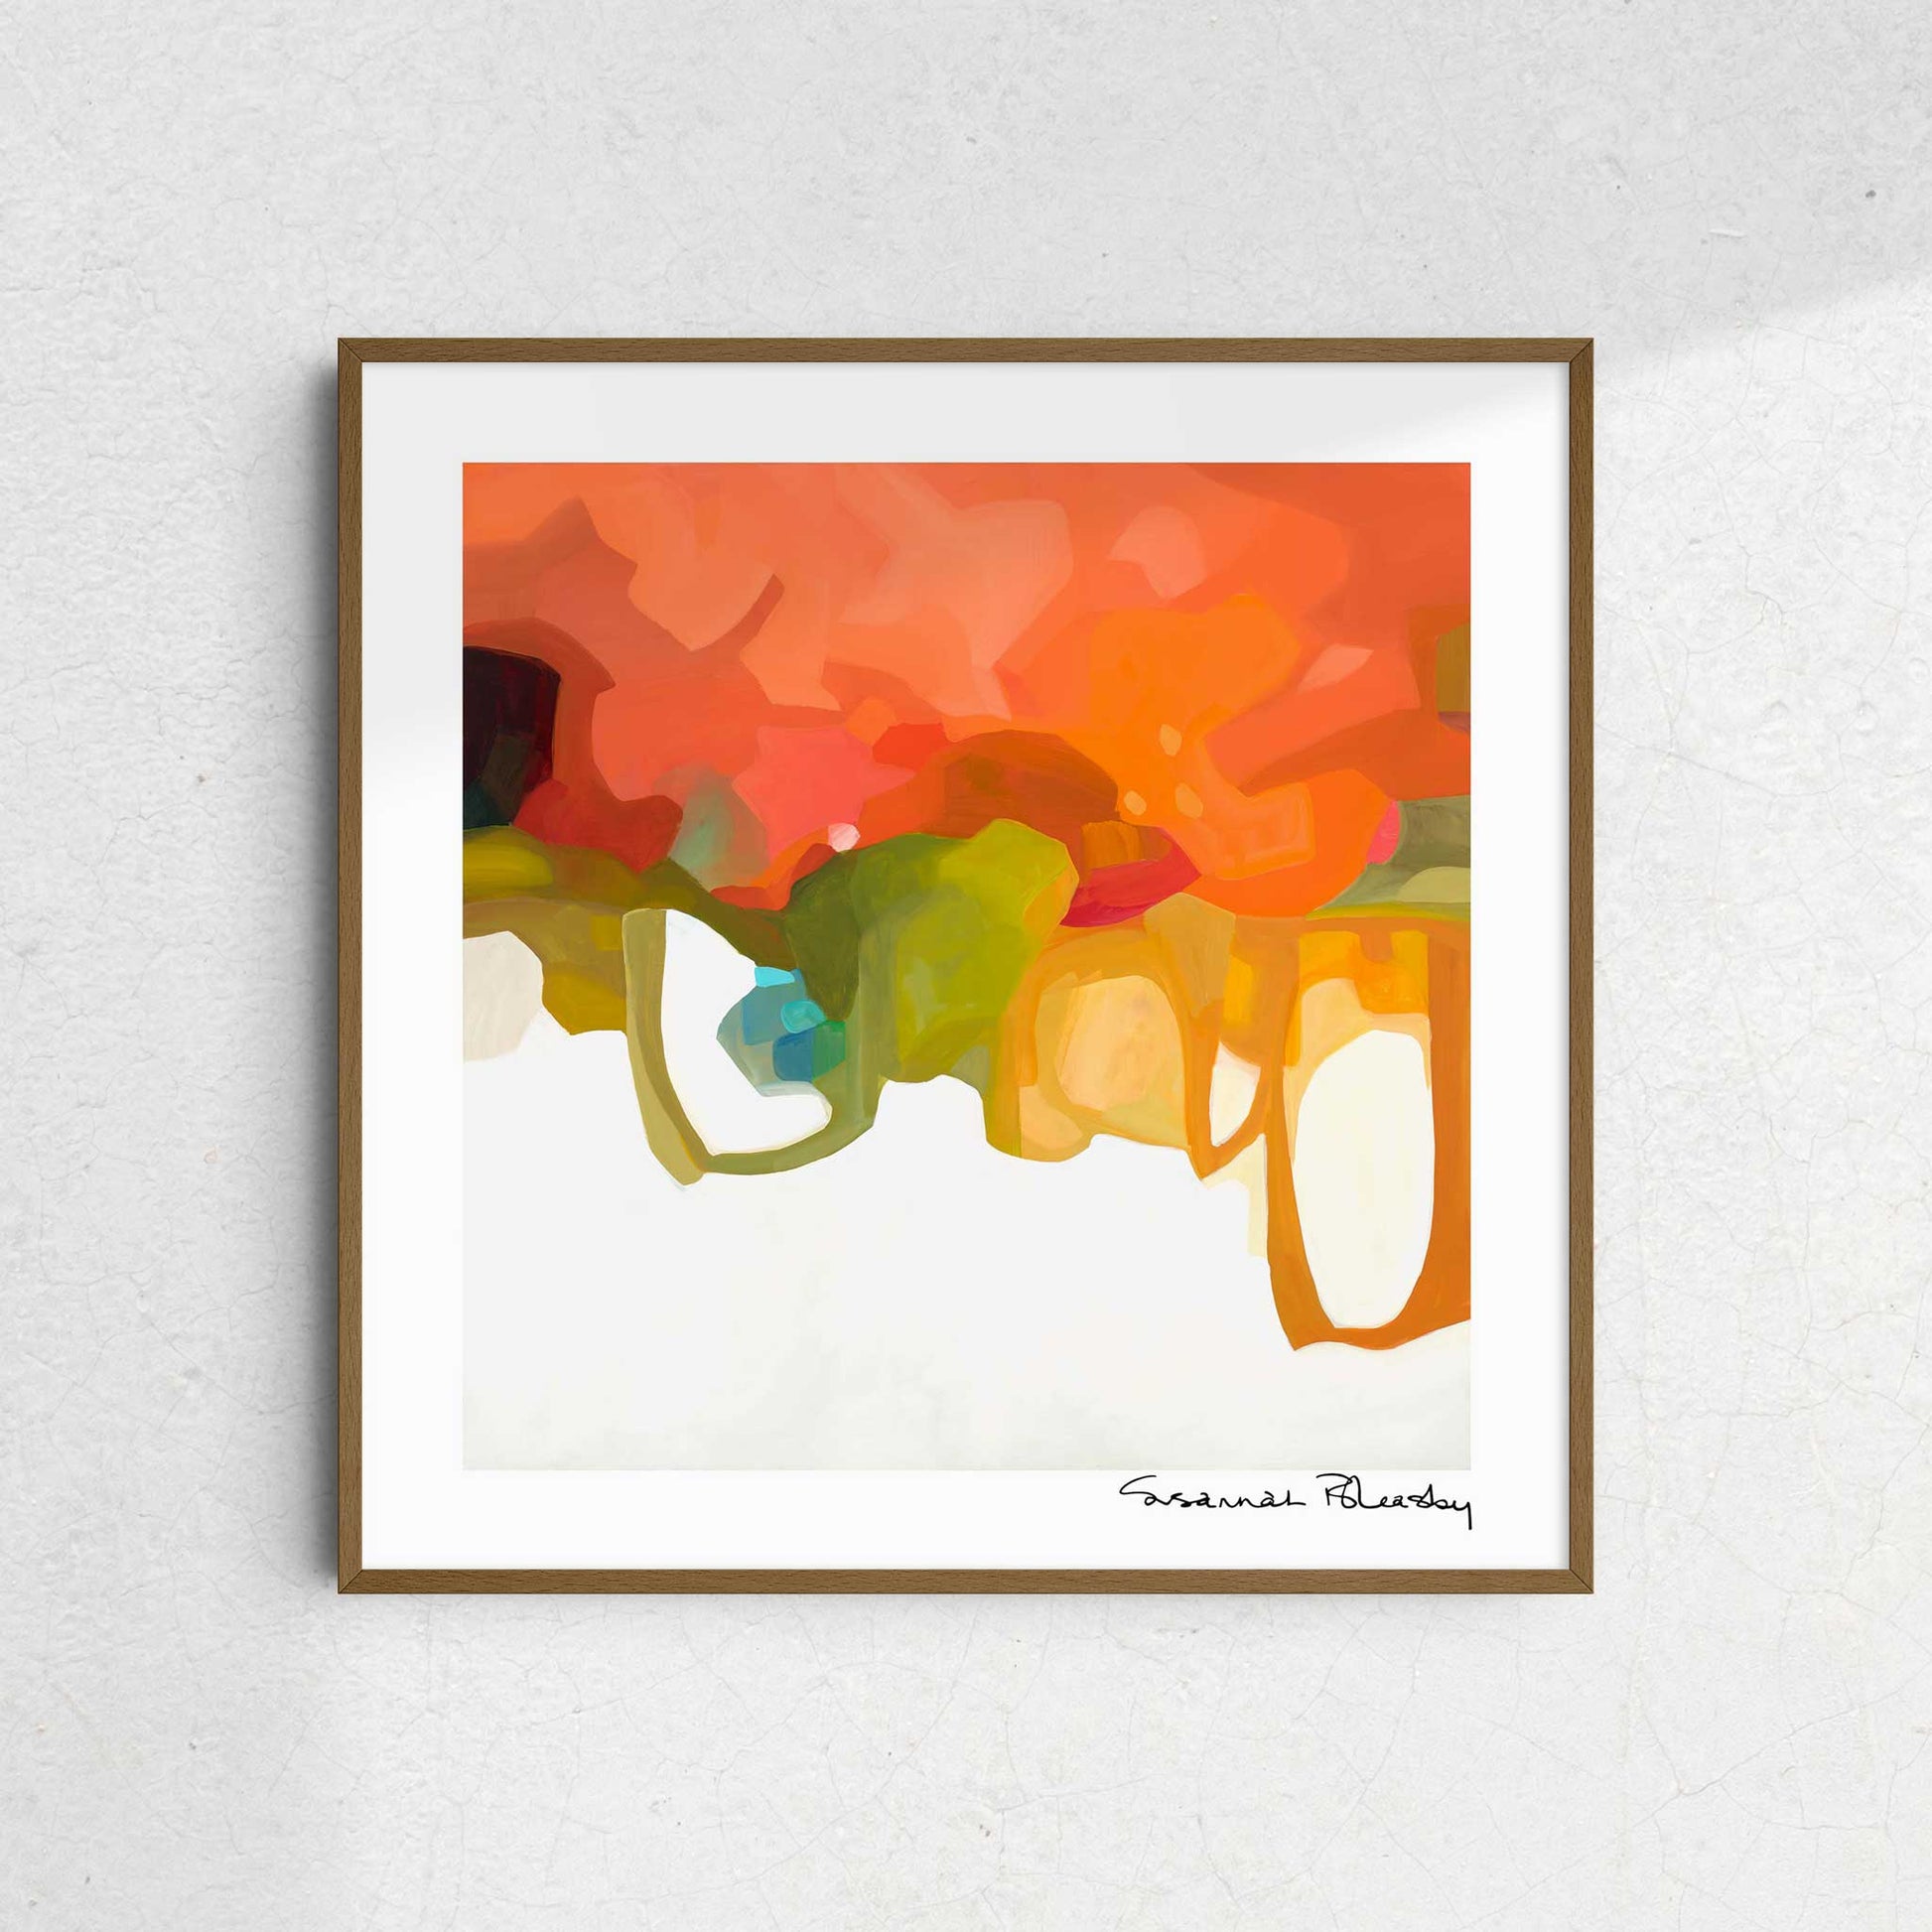 'Citrus' as 12x12 art print created from an oversized orange abstract painting by Canadian artist Susannah Bleasby